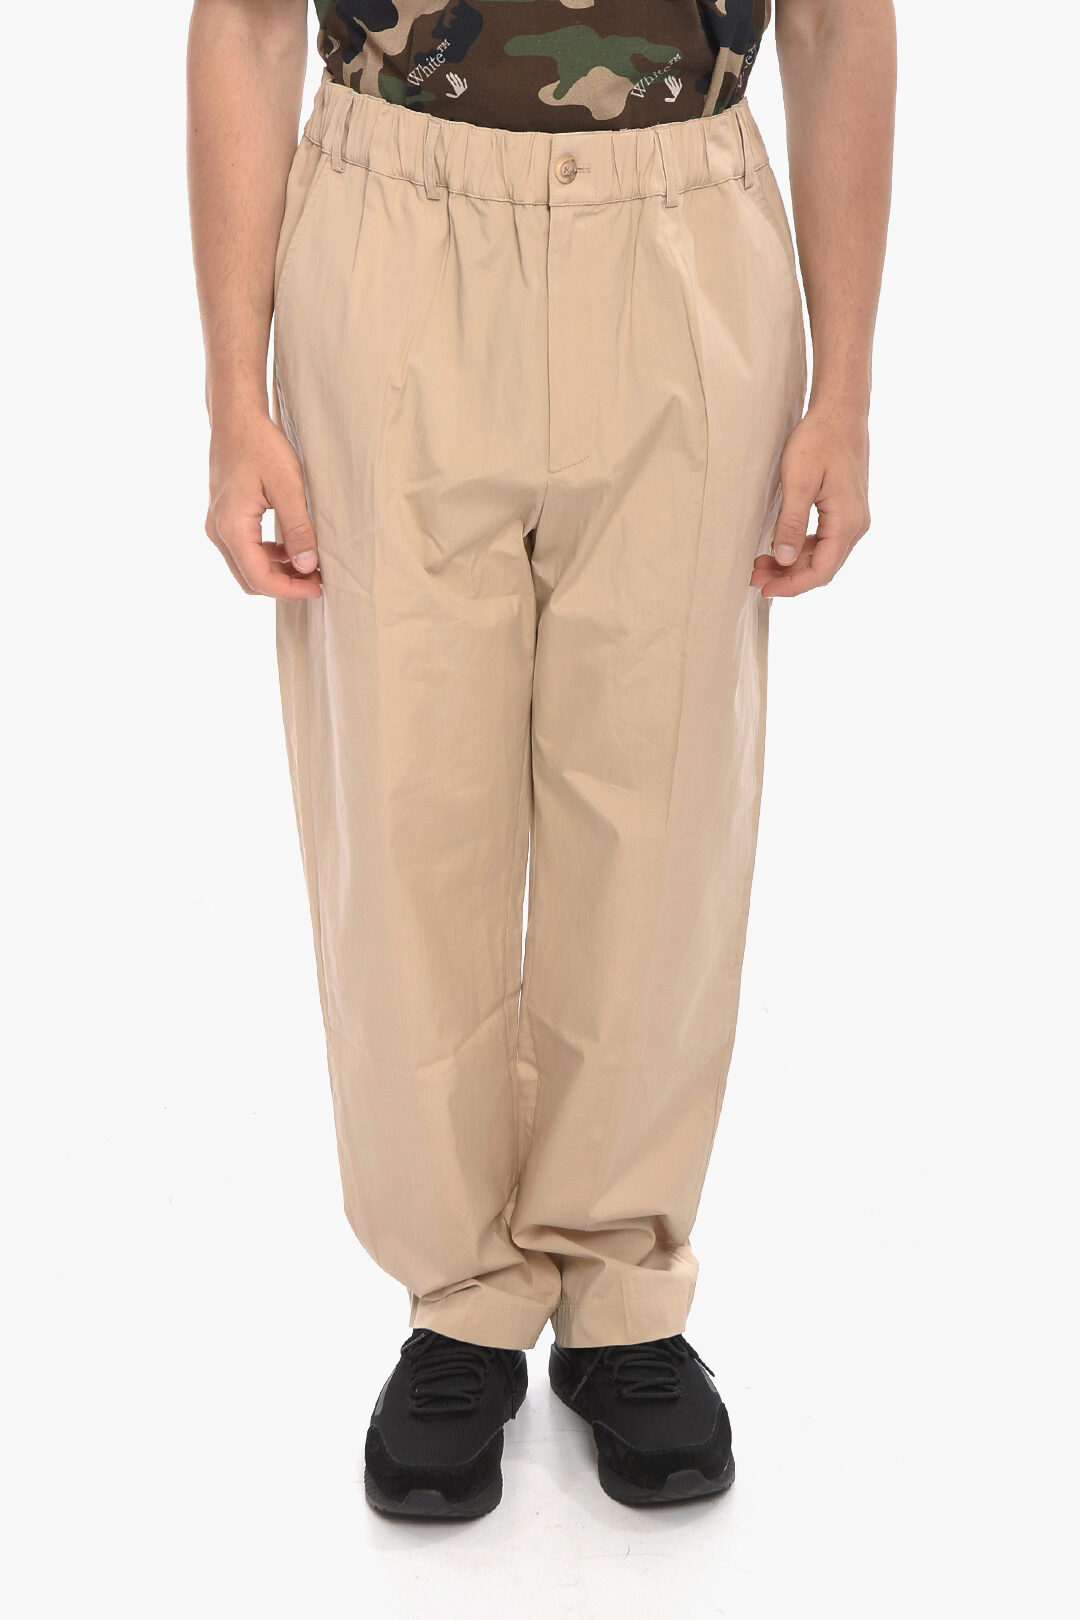 Cotton Relaxed Fit Chinos Pants